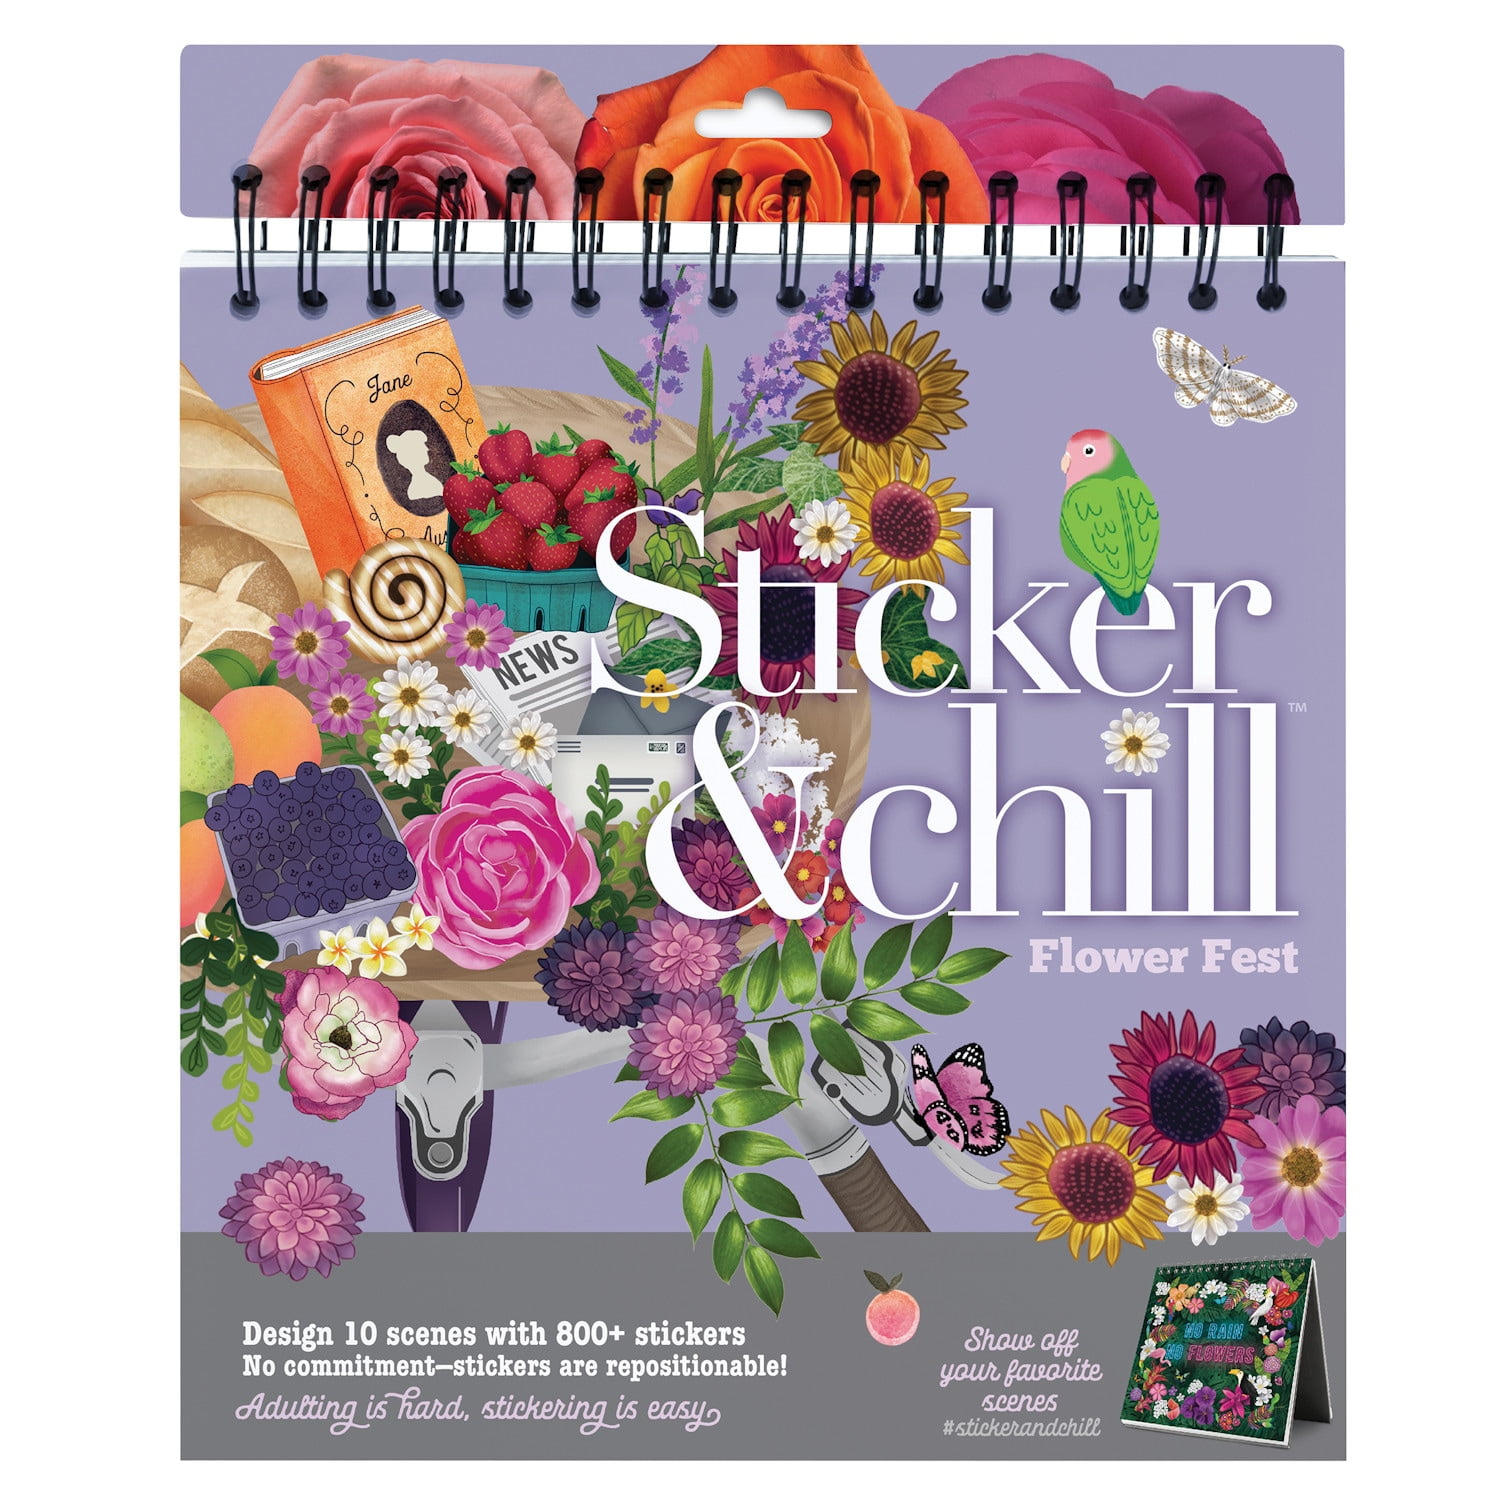 Sticker & Chill Flower Fest Book for Adults 800+ Stickers Colorful Scenes  Interactive Relaxation 